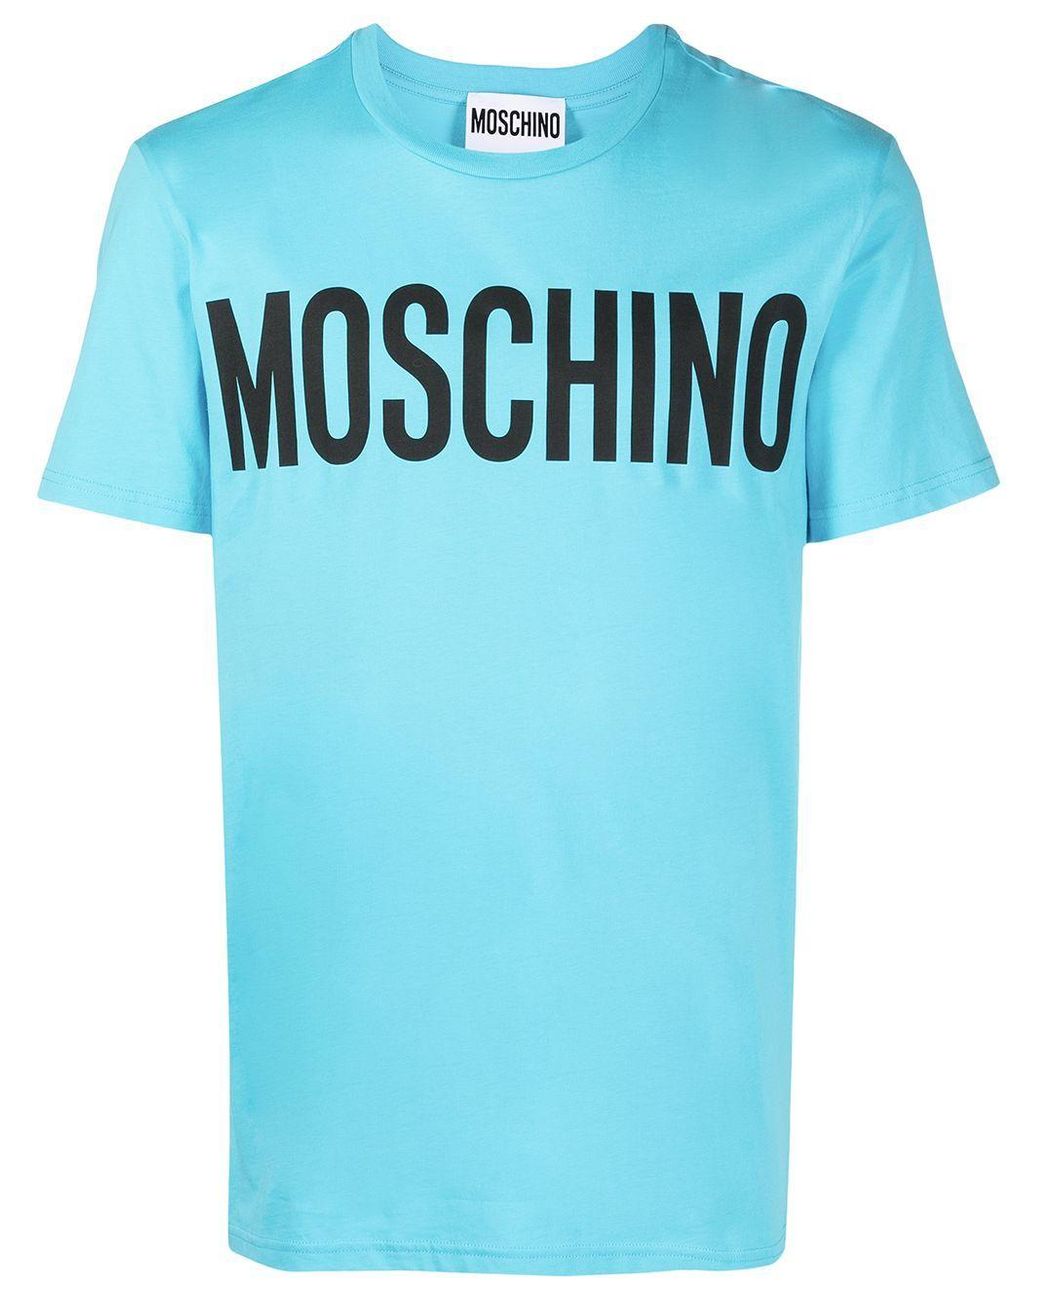 Moschino Cotton T-shirt in Light Blue (Blue) for Men - Lyst